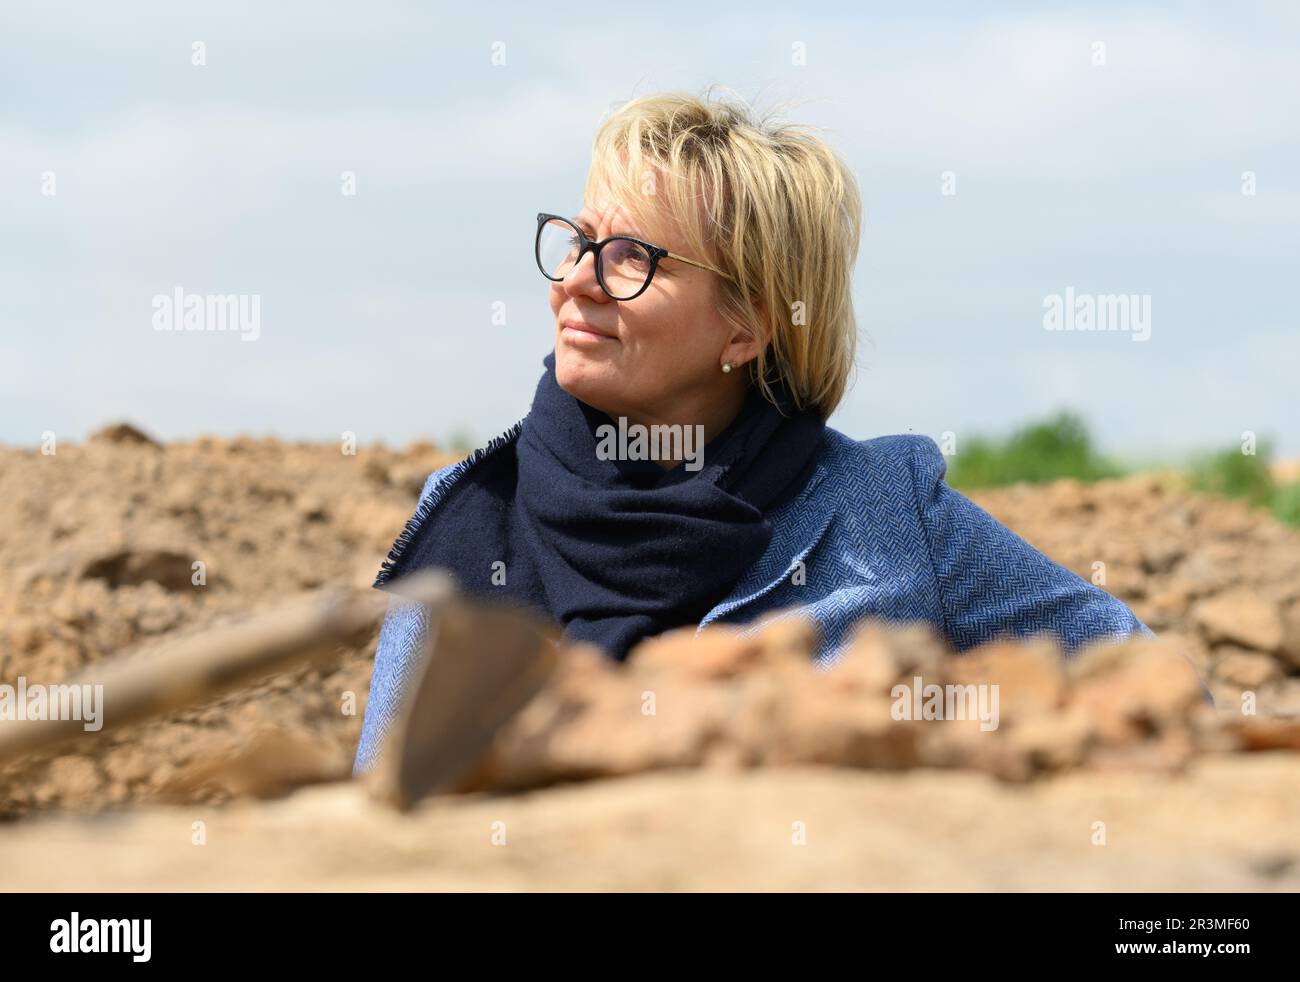 24 May 2023, Saxony, Döbeln: Barbara Klepsch (CDU), Minister for Culture and Tourism in Saxony, visits the excavations of the Saxony State Office for Archaeology on the construction site of the future 'Karls Erlebnisdorf'. Since the fall of 2021, the Saxony State Office for Archaeology has been conducting extensive excavations on the 17-hectare site of the future adventure village near Döbeln. With its great wealth of finds and immense size, the site near Döbeln-Gärtitz is one of the largest settlement sites of the Early Neolithic period (5,500 - 4,500 BC) in the Middle Saxon loess region know Stock Photo